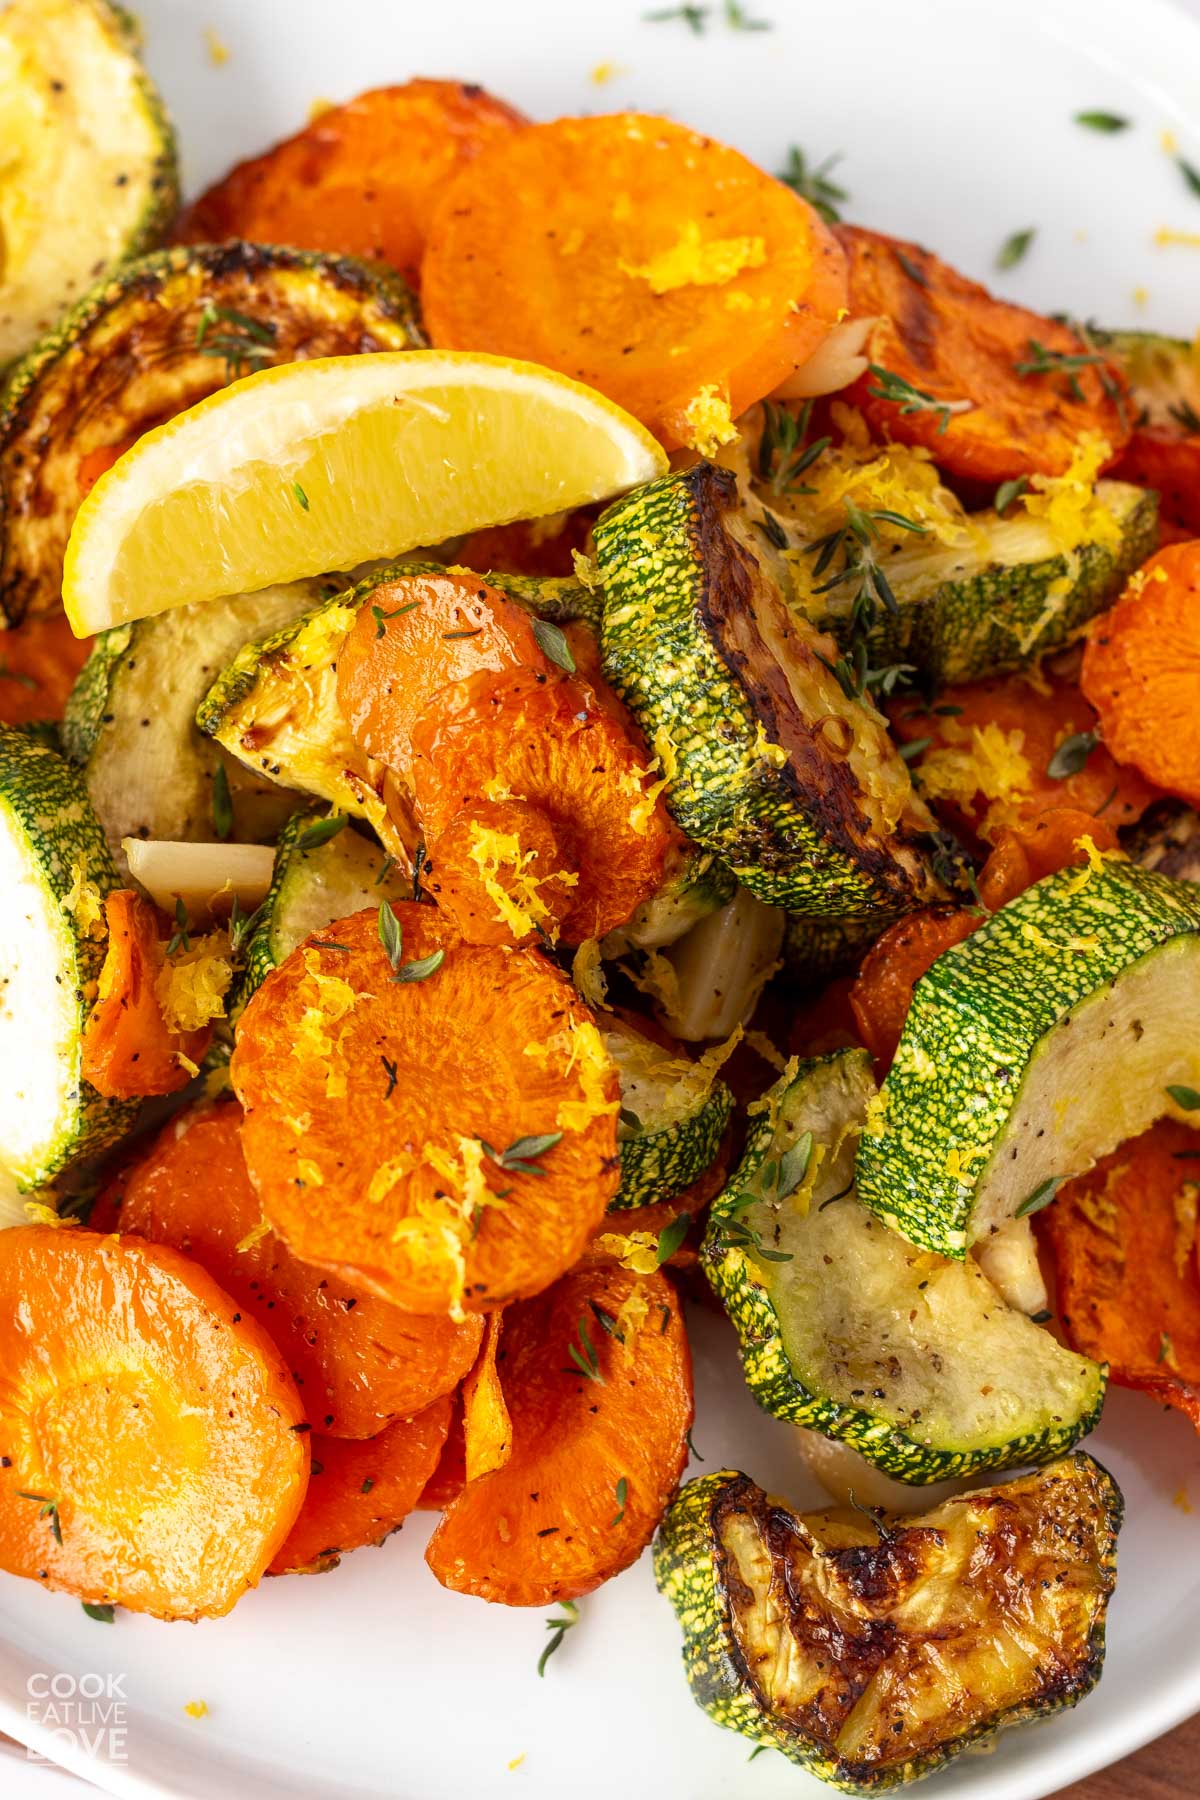 Roasted carrots and zucchini with lemon zest on top and a lemon wedge.